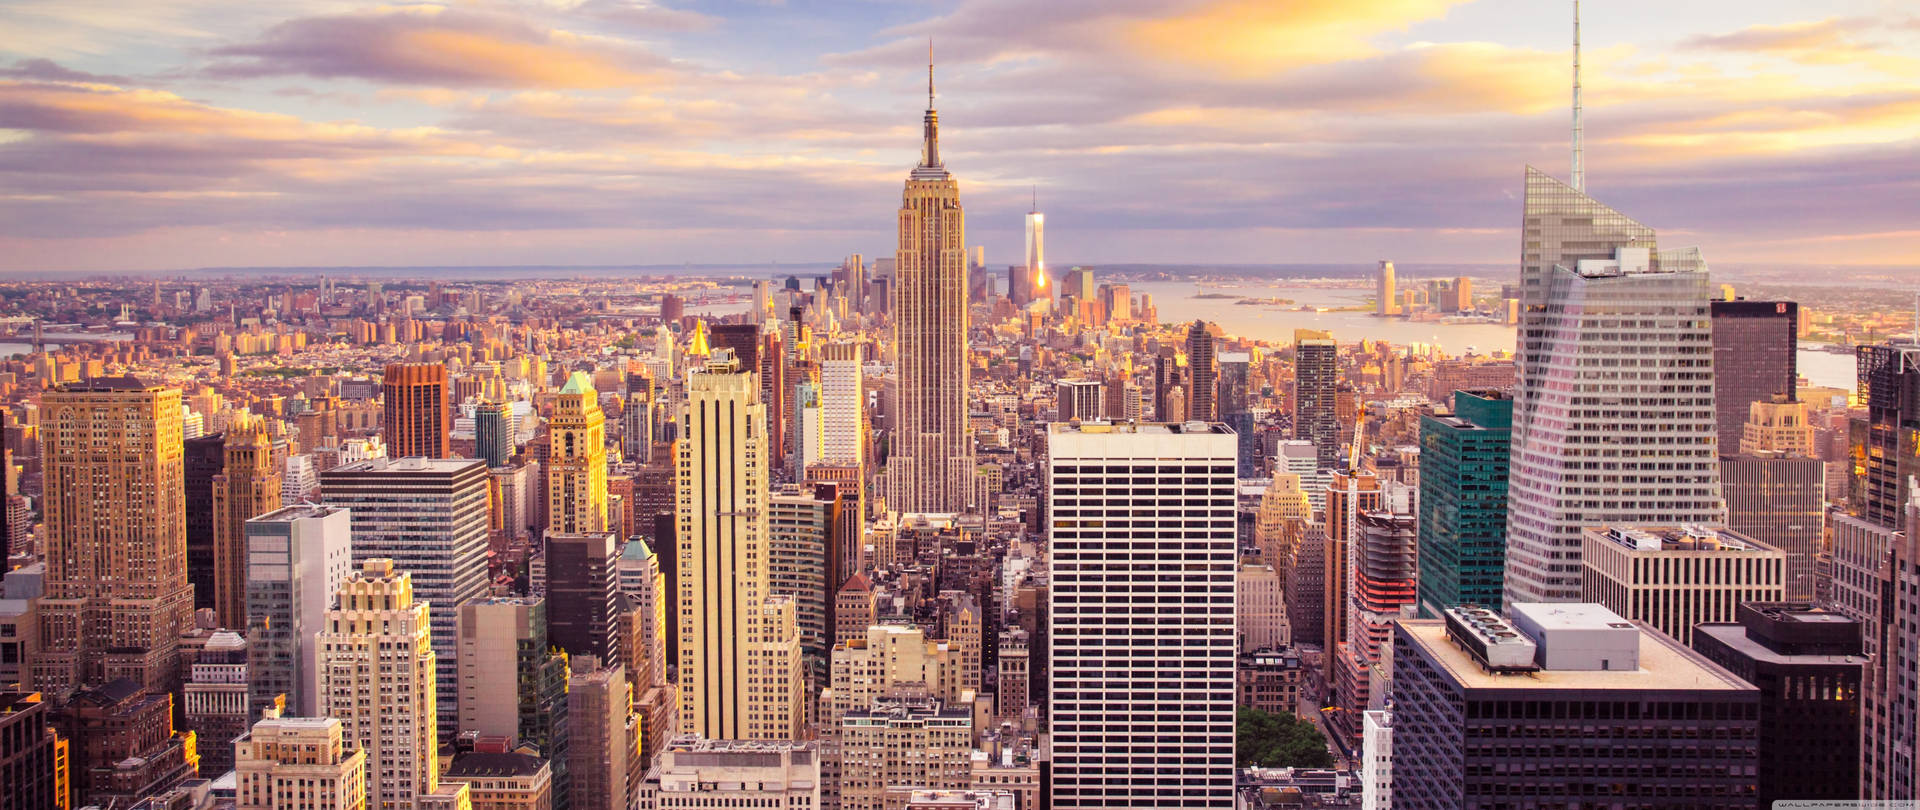 New York City View 4k Ultra Widescreen Background